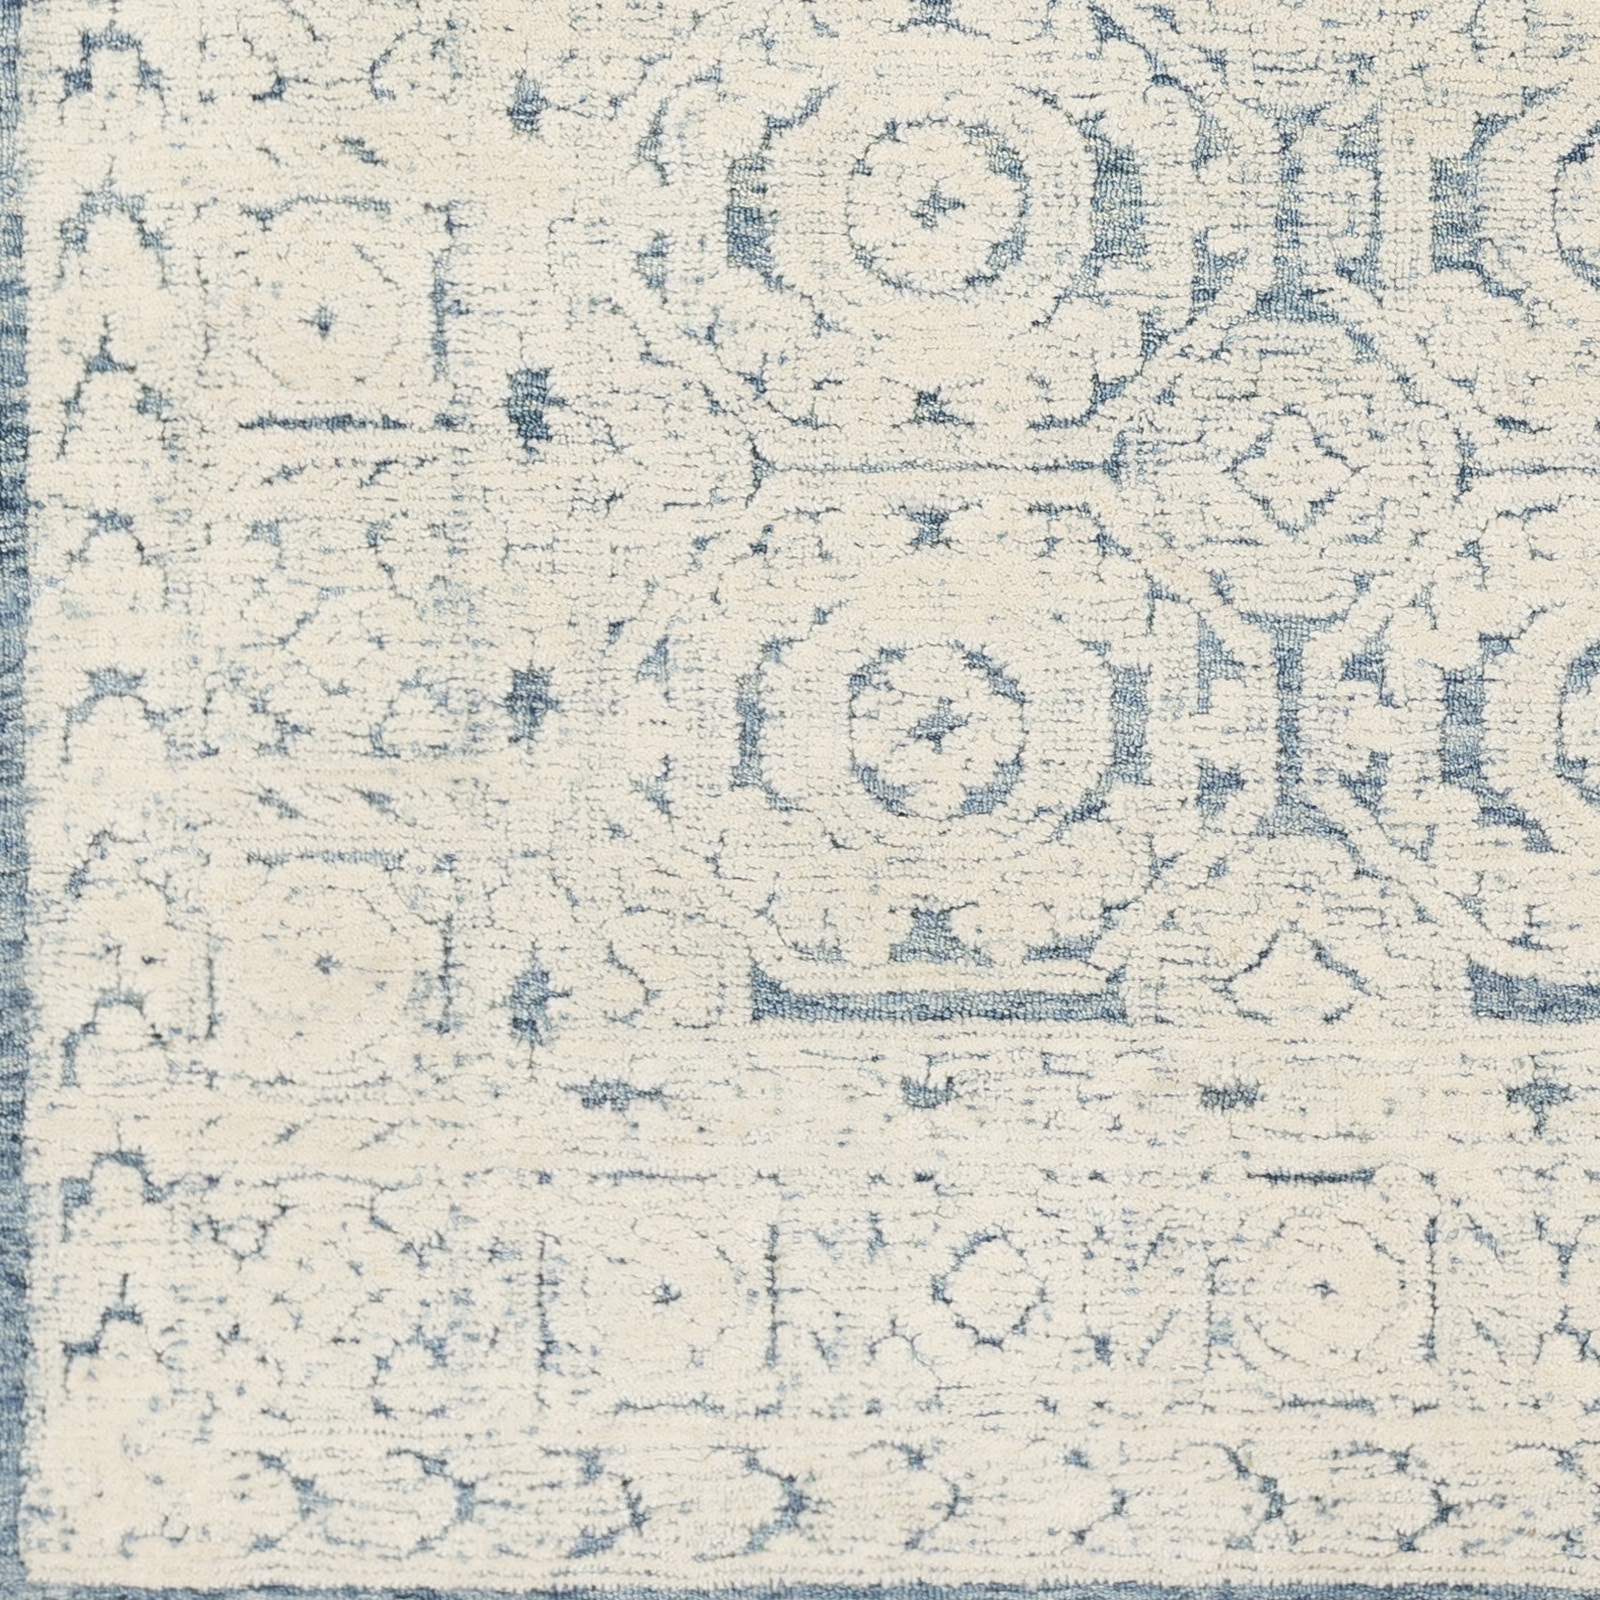 Louvre Rug, 9' x 12' - Image 2